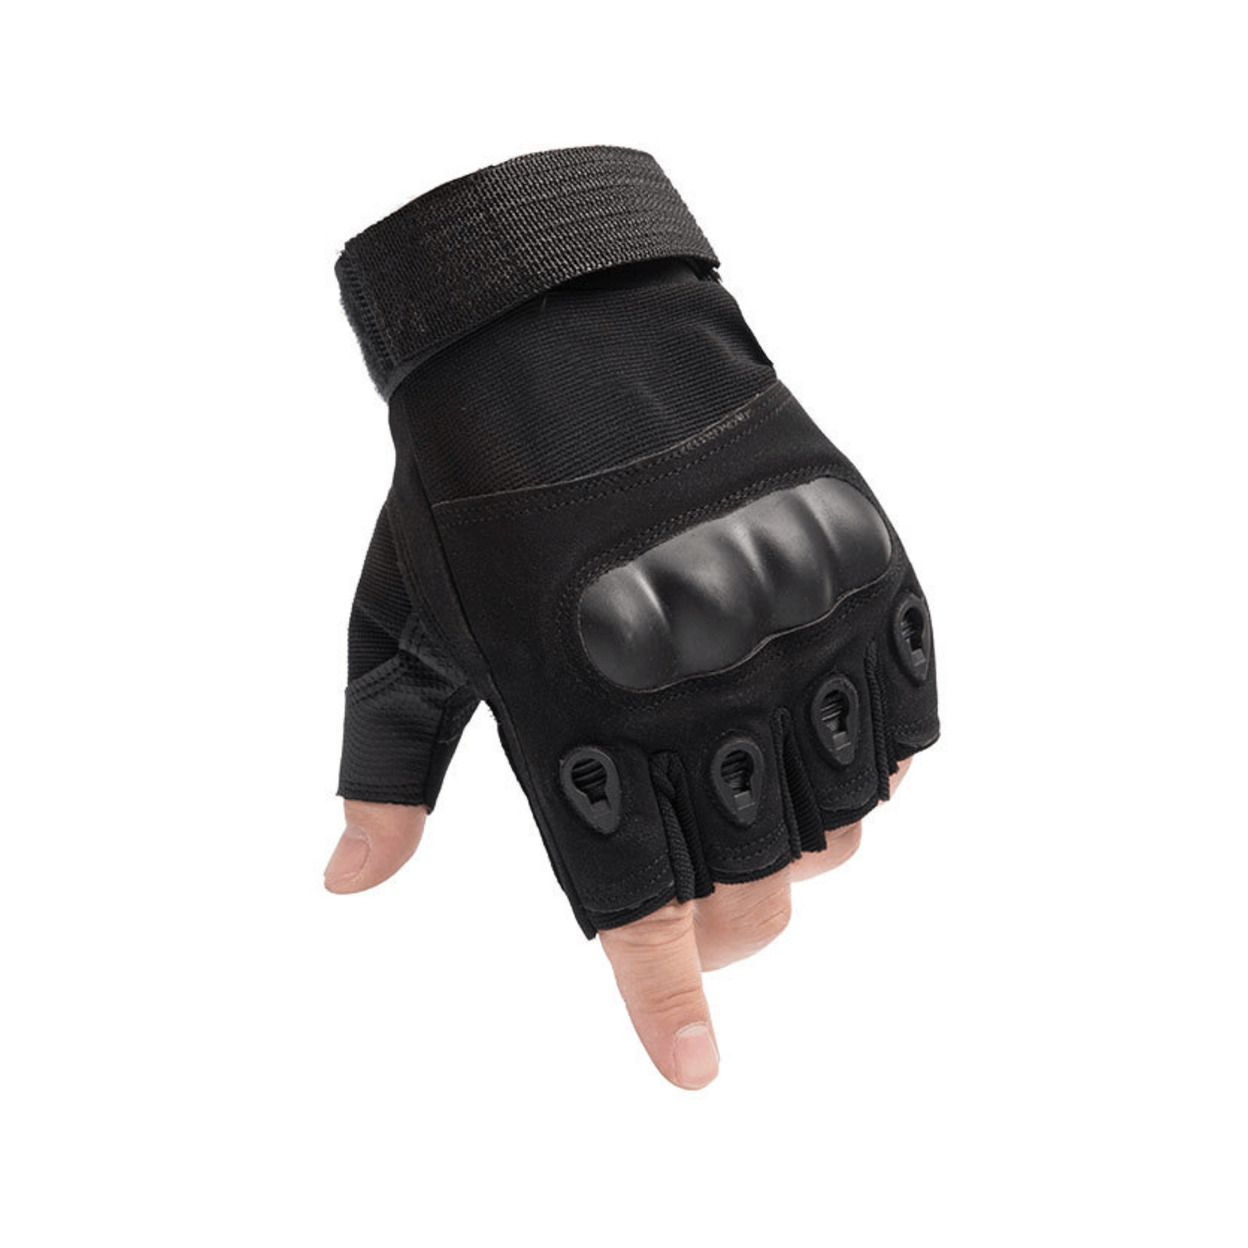 Tactical Fingerless Airsoft Gloves For Outdoor Sports, Paintball, And Motorcycling - Black, X-Large